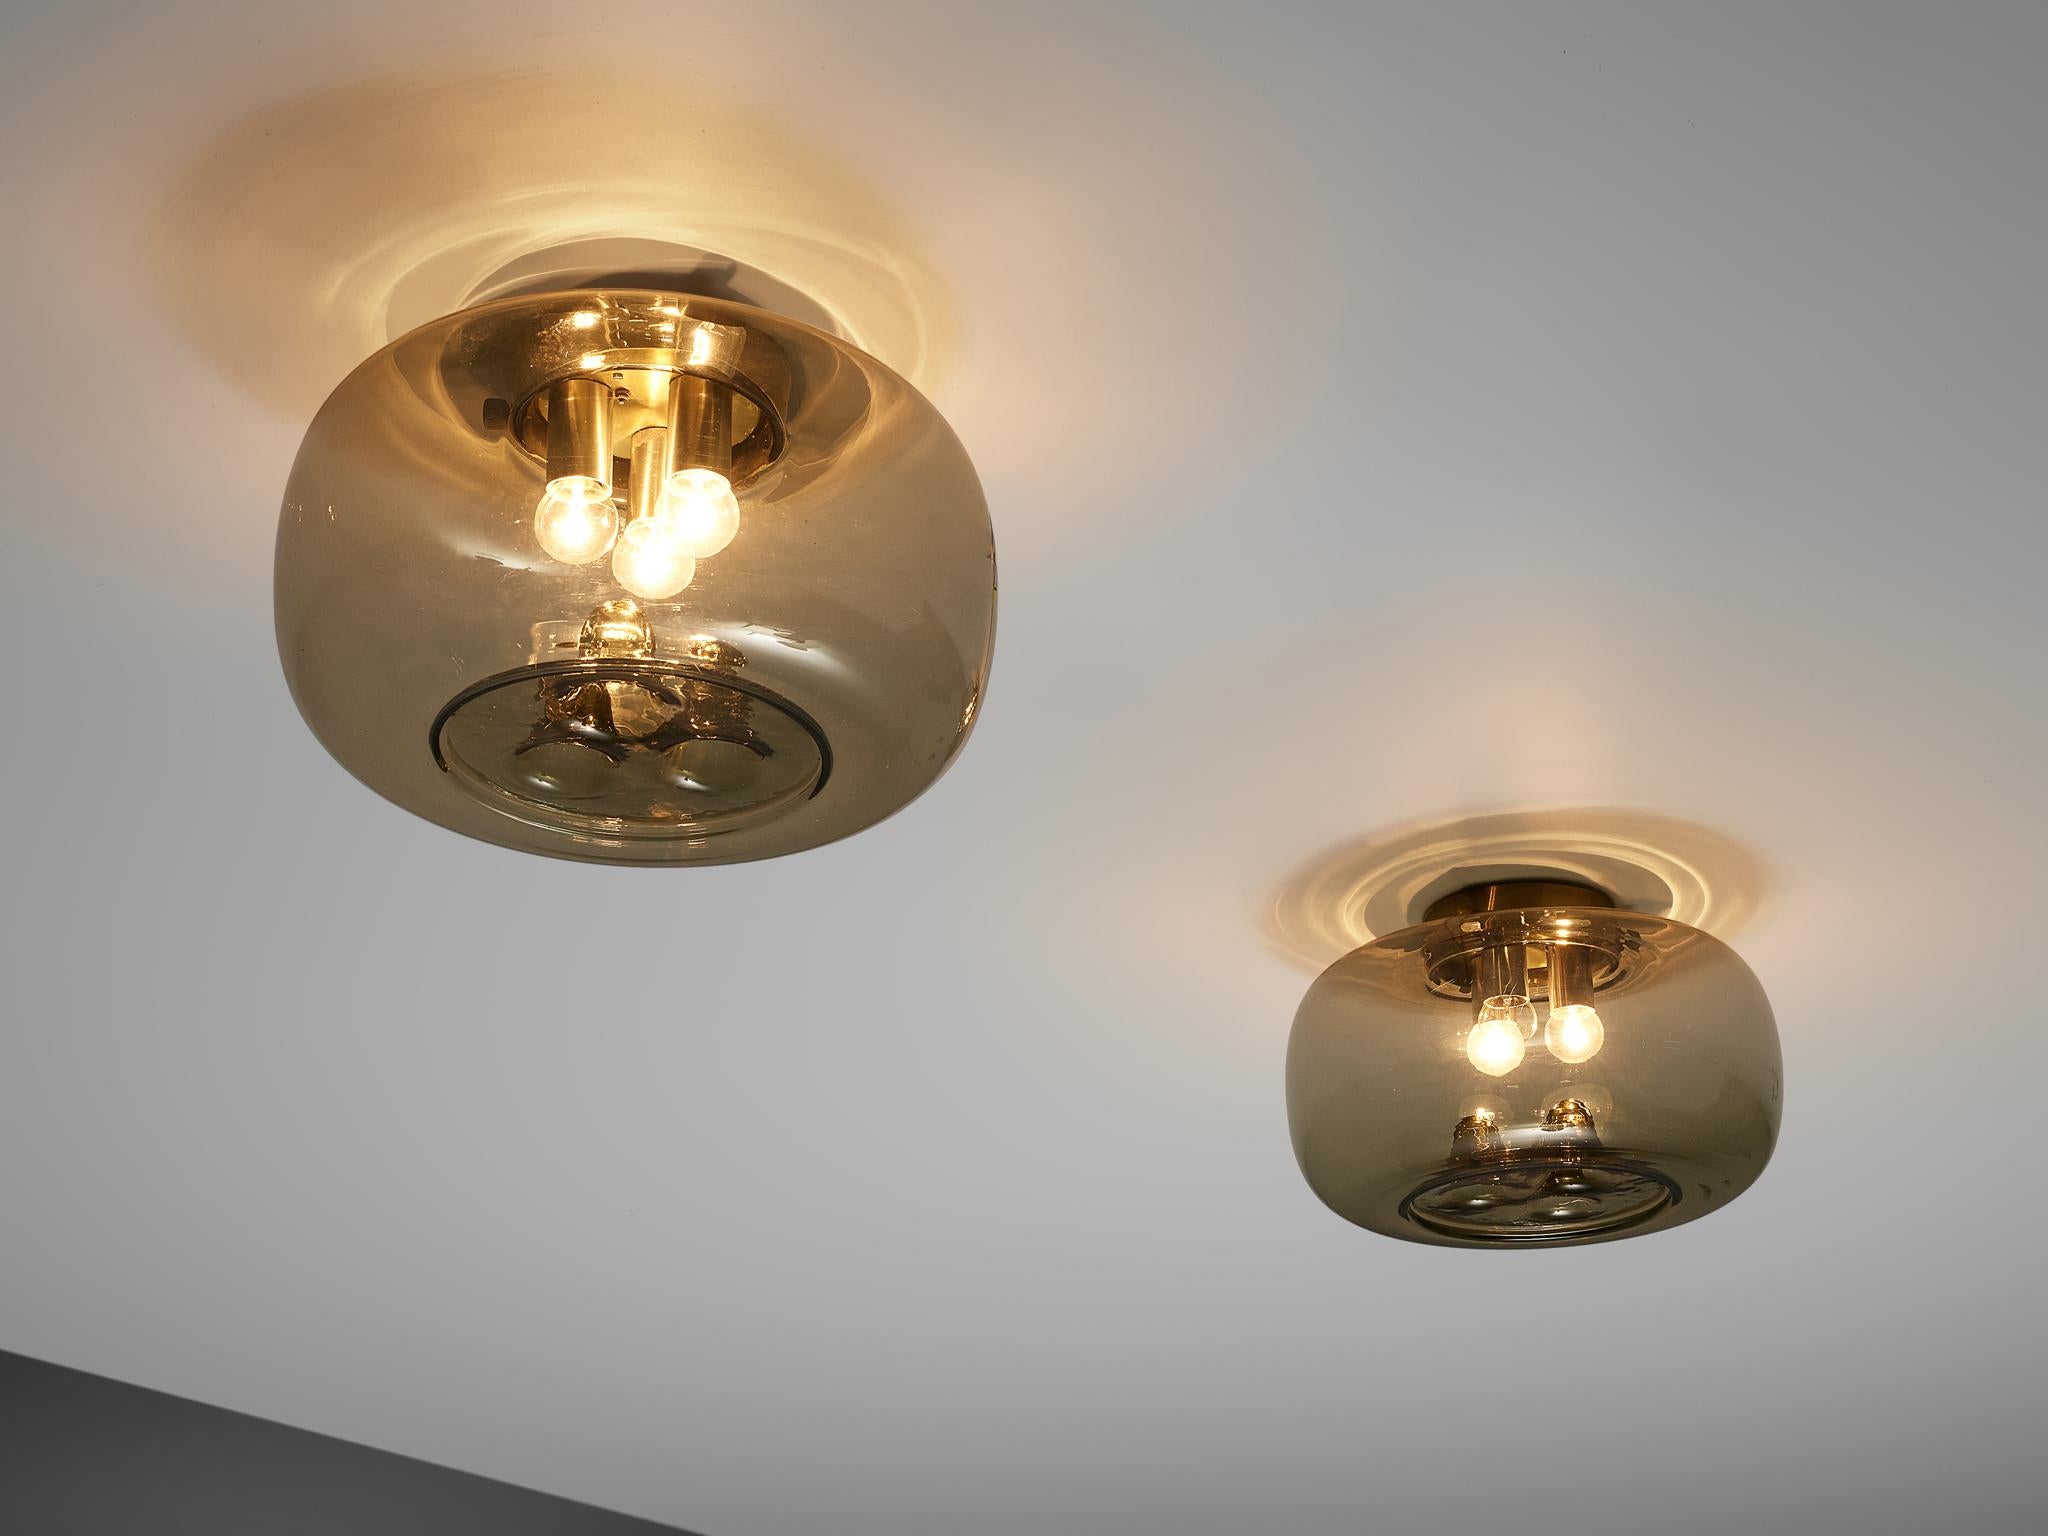 RAAK Amsterdam, ceiling light, smoked glass, brass, the Netherlands, 1970s

These beautifully designed glass shades by RAAK Amsterdam hold three small light bulbs, attached to brass cylindrical mountings. On the opposite side of the shade, three